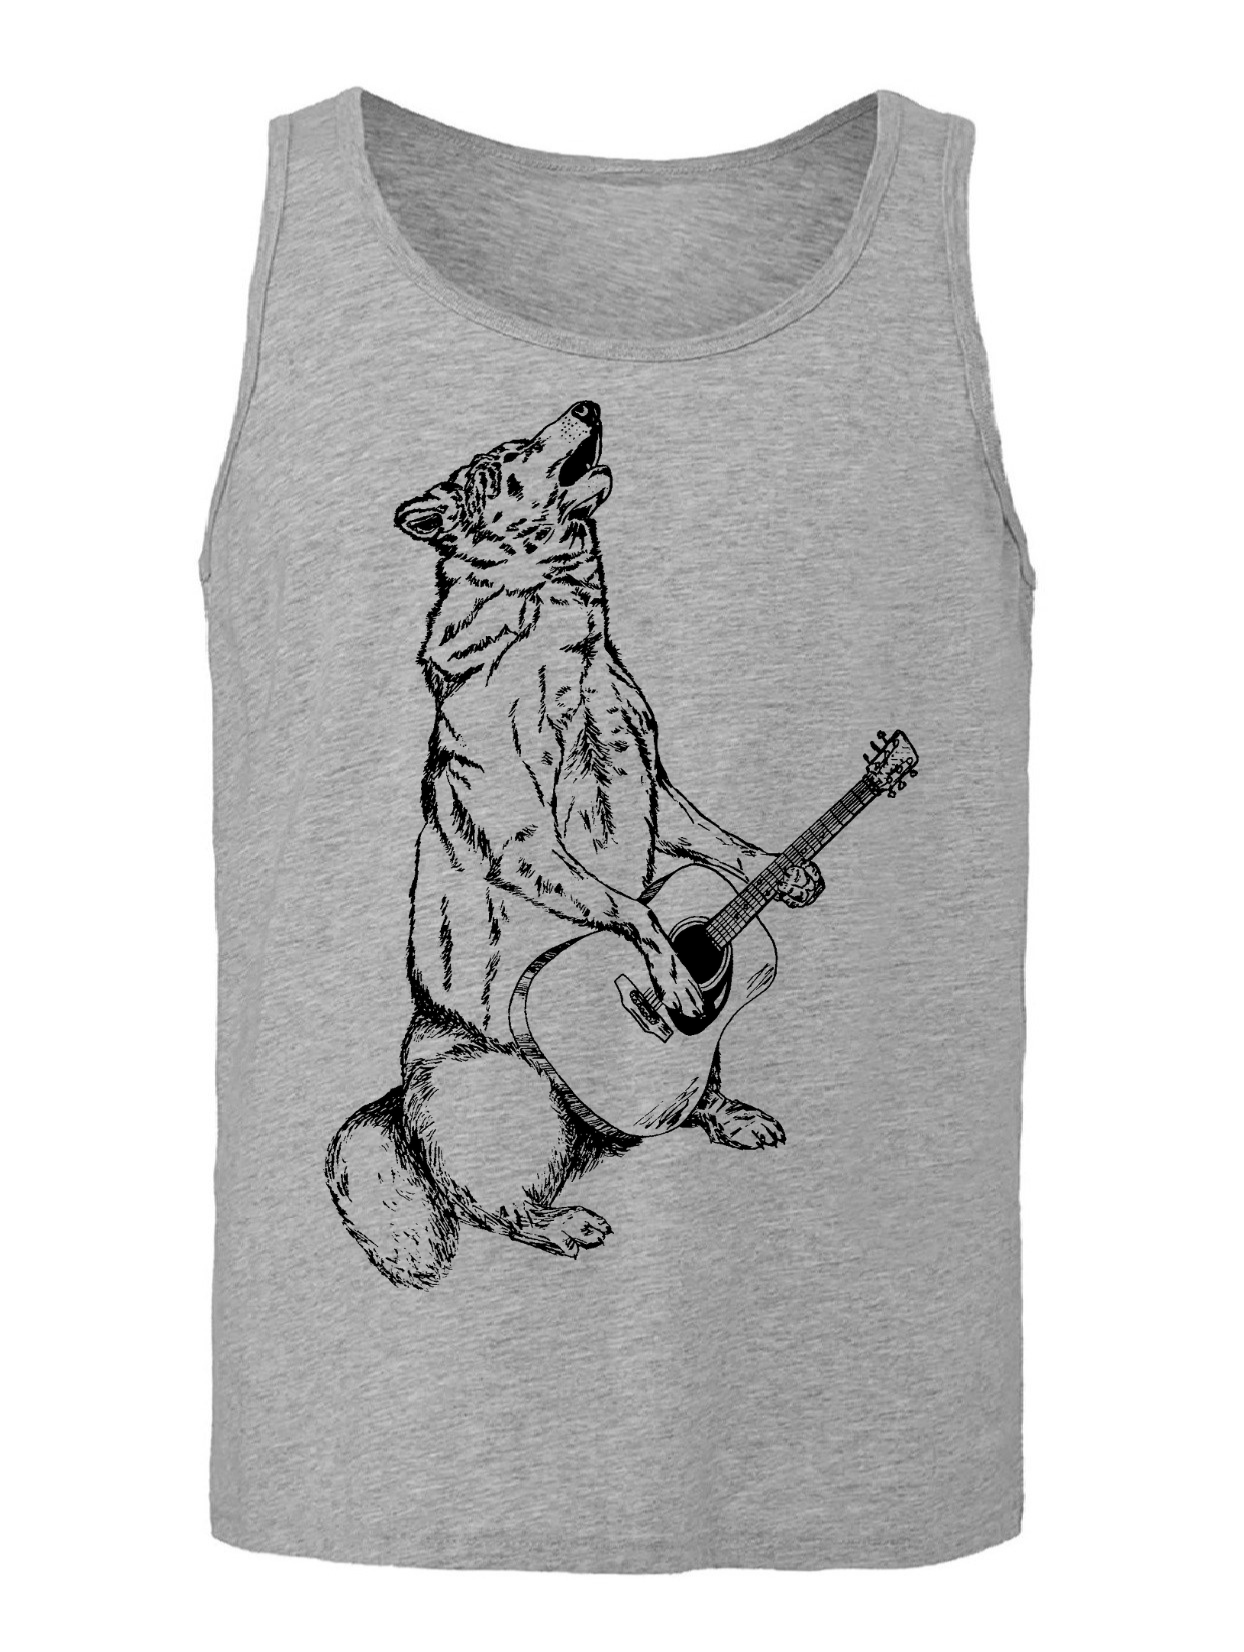 Howling Wolf Playing Guitar Unisex Tank Top